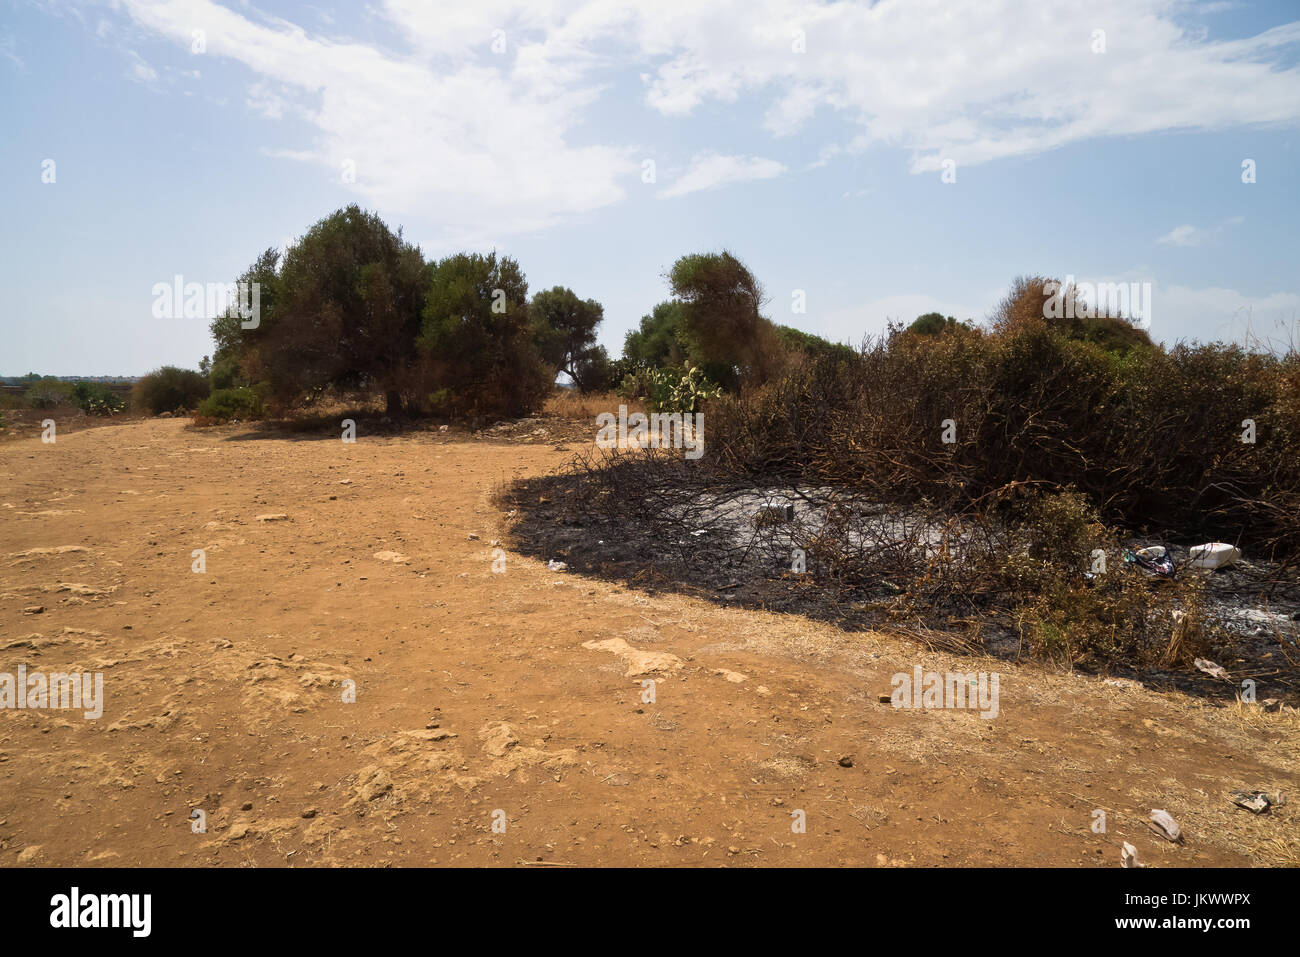 landscape of mediterranean plants burnt,dry soil from the sun in a warm july morning,after a fire. Stock Photo